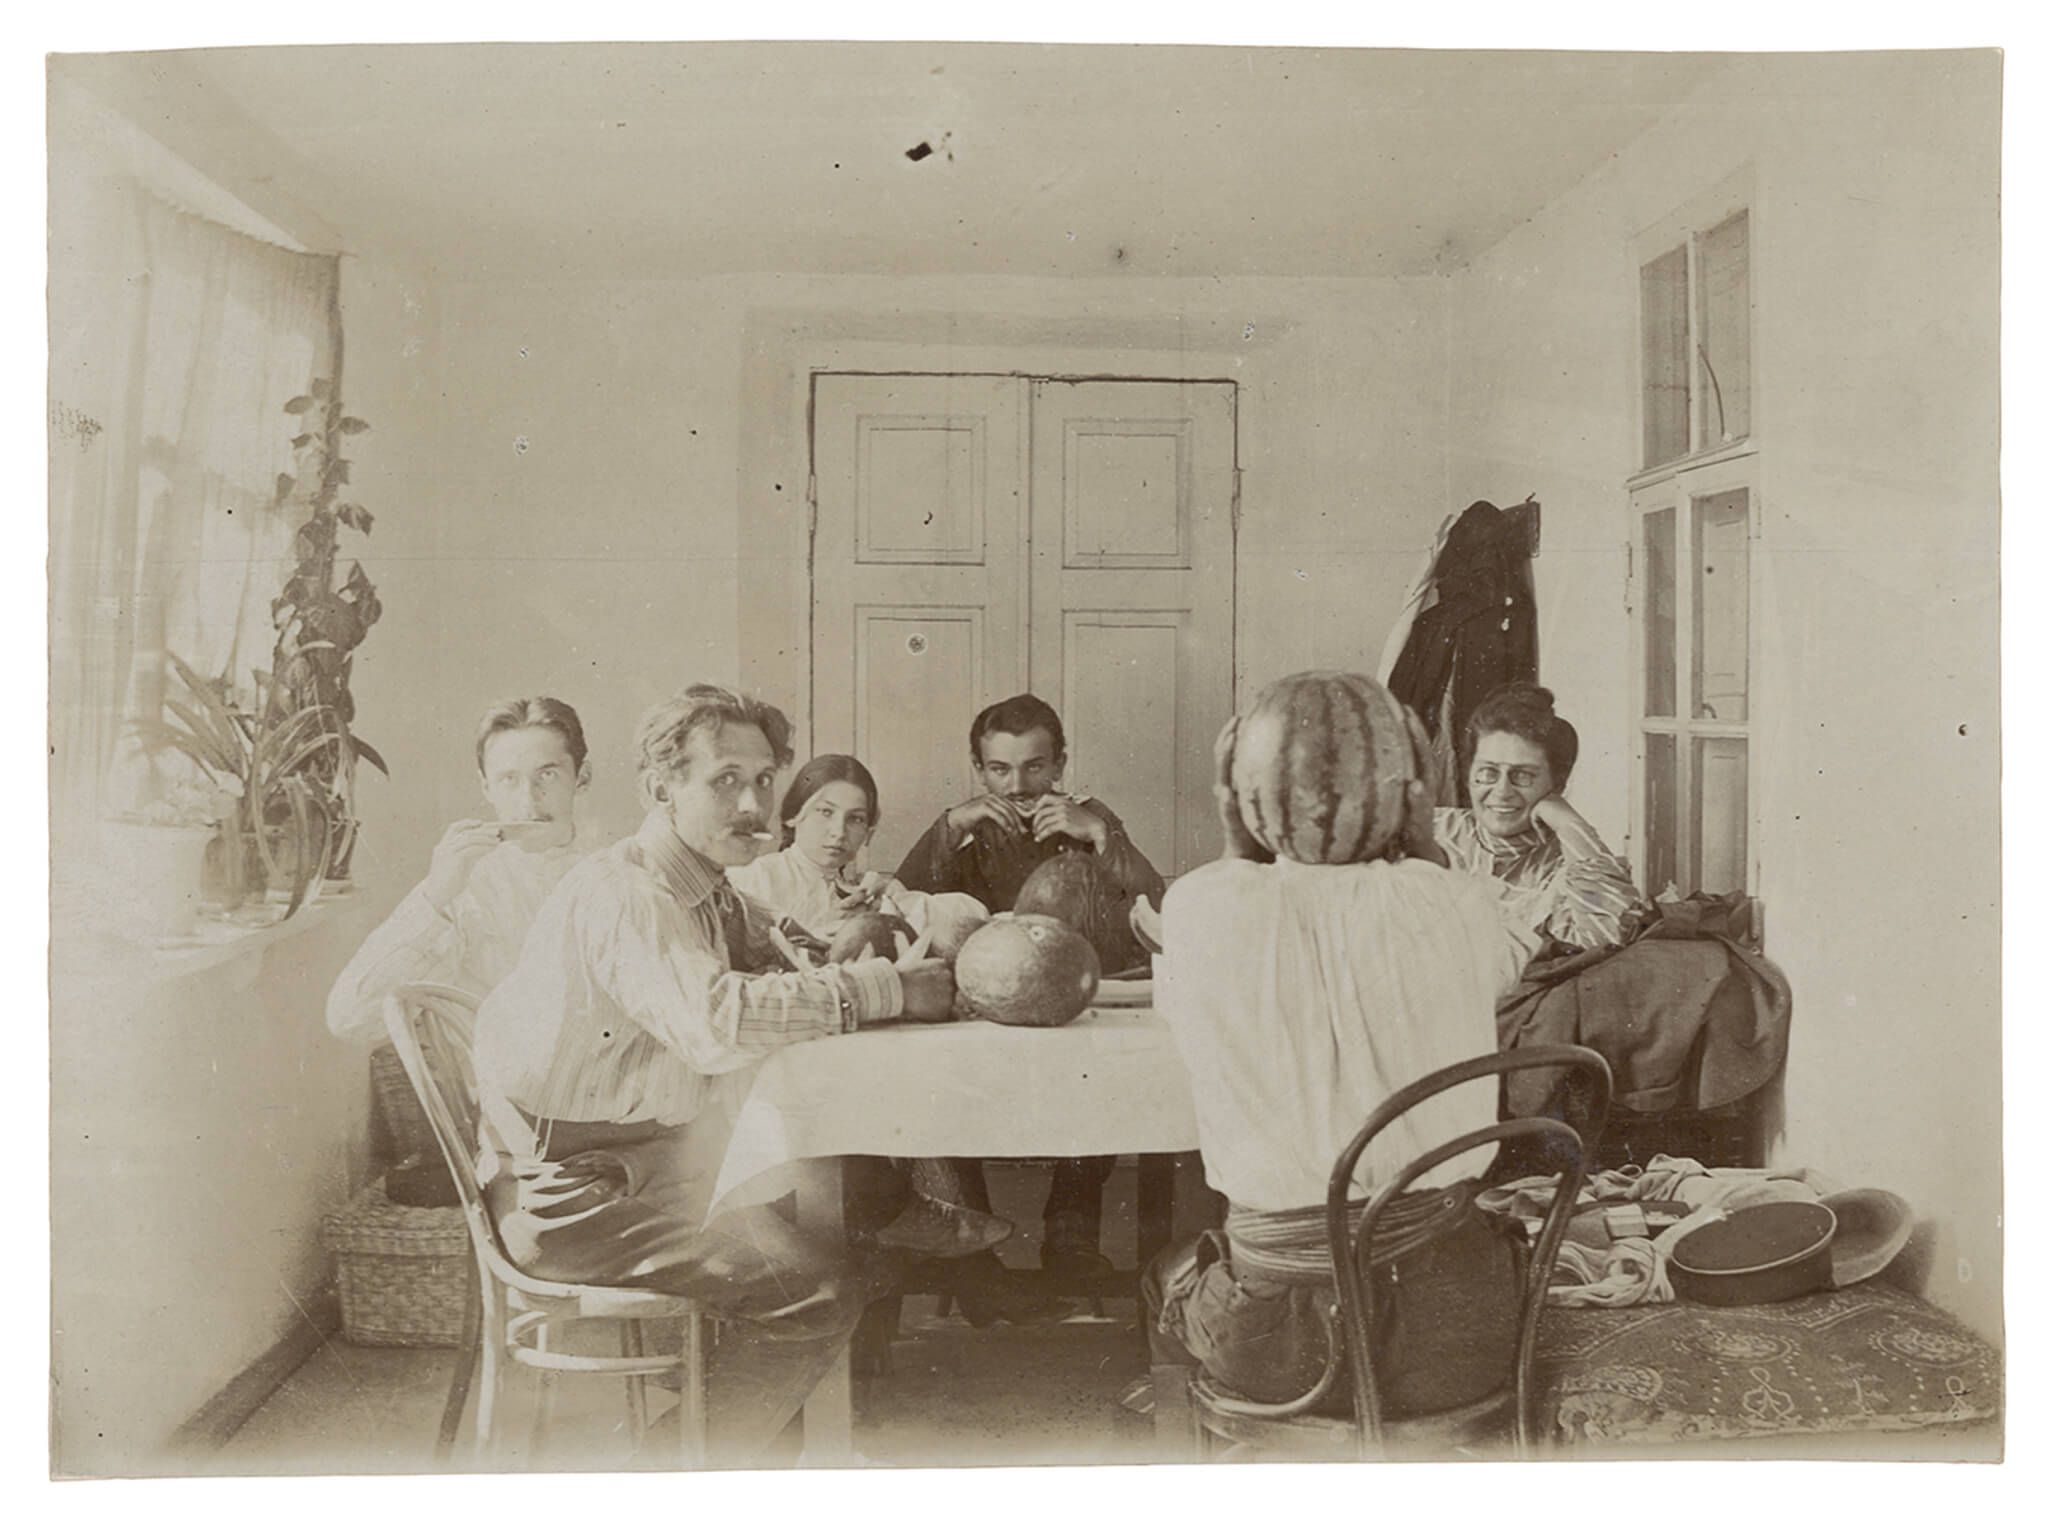 Image for: M.K. Čiurlionis with Wolmans and friends